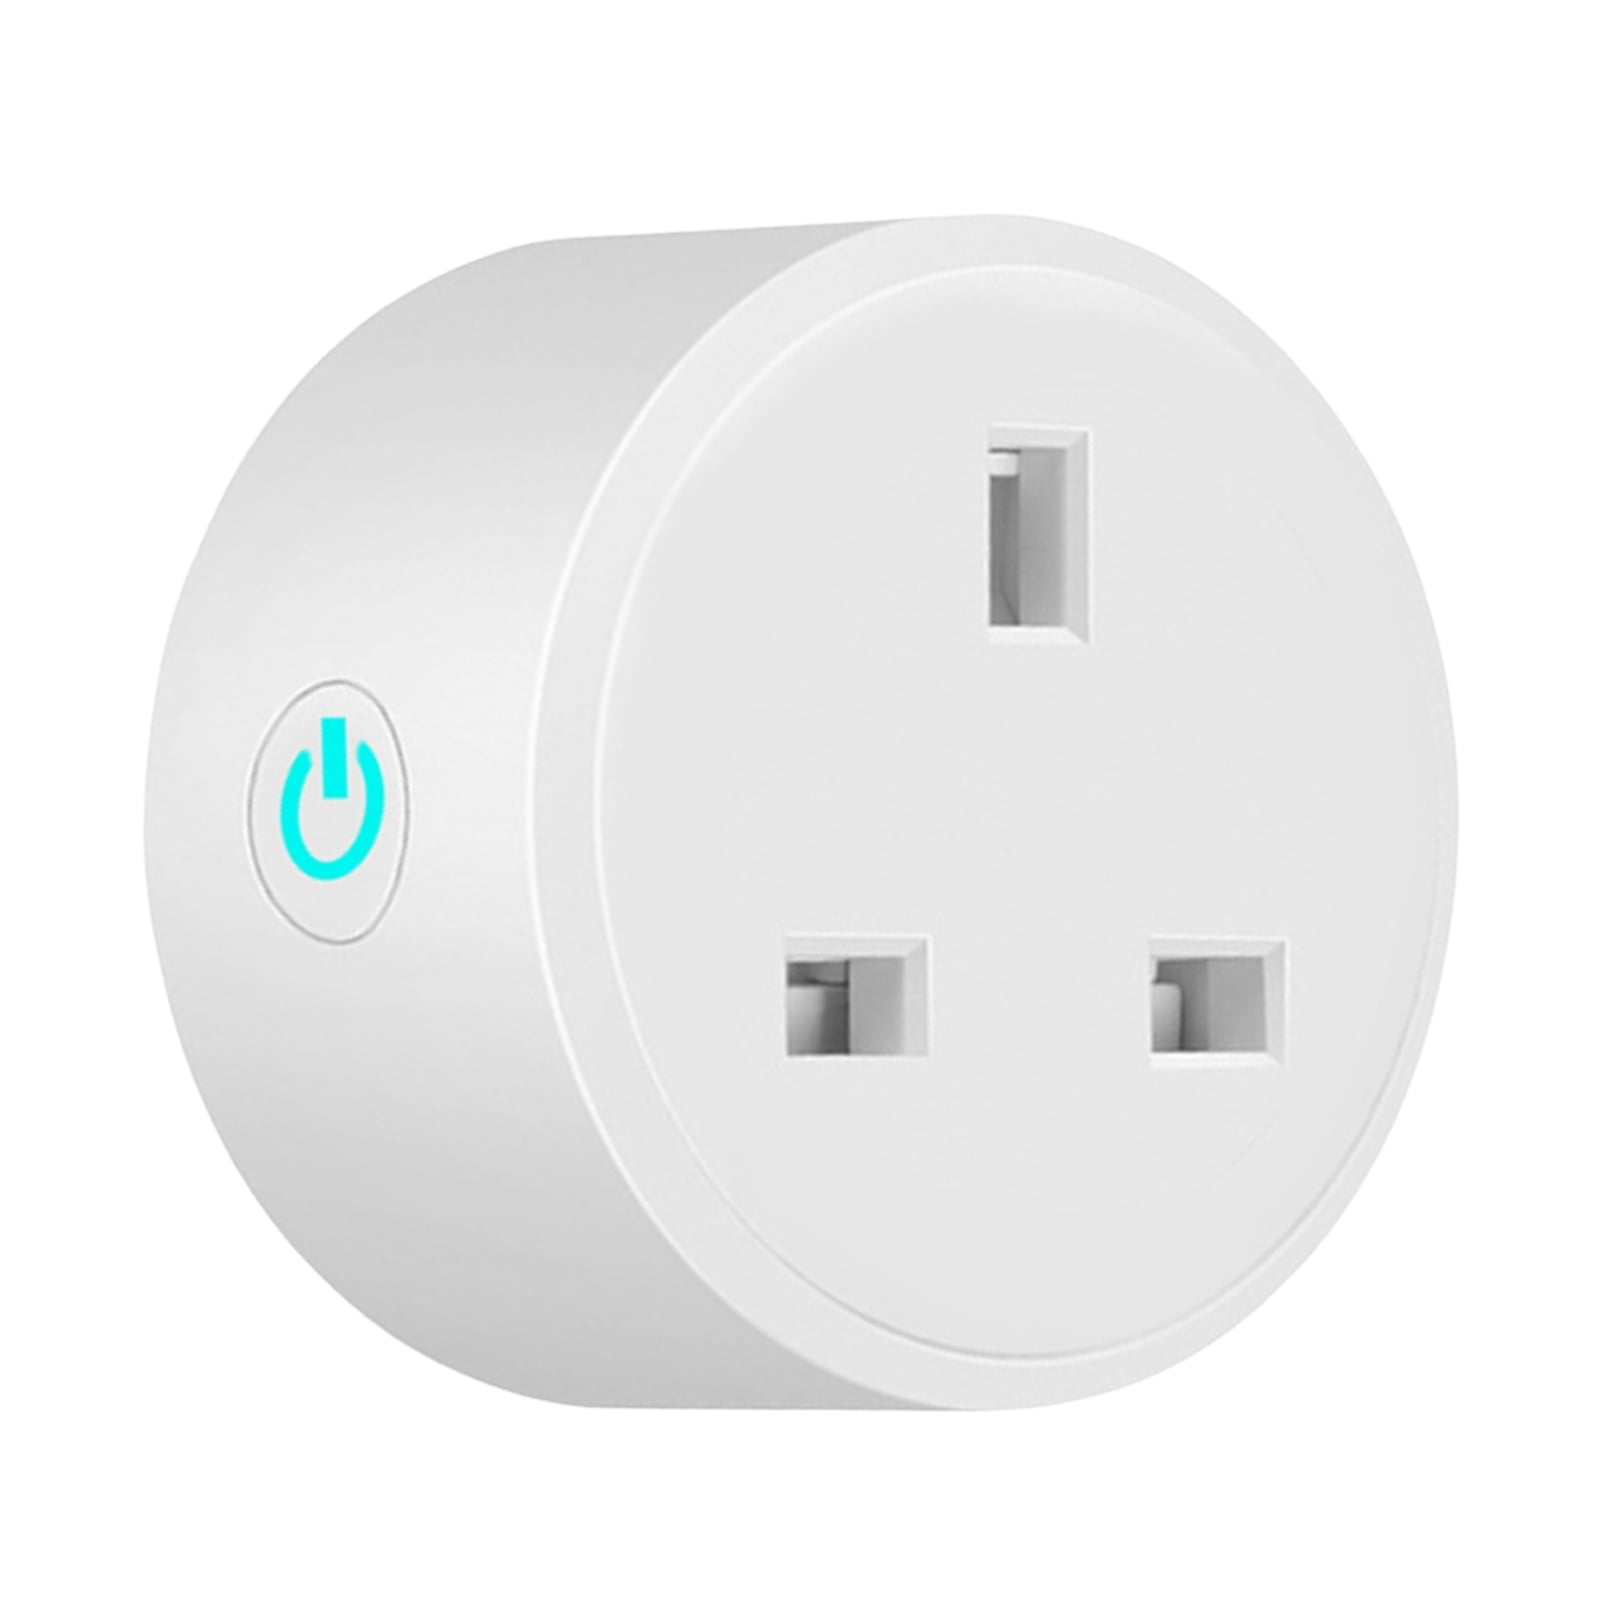 Control your Devices from Anywhere Intelligent Timer Outlet Switch Household Appliances Remote Control via App for iOS/Android WiFi Smart Plug/Socket with Temperature Humidity Controller 